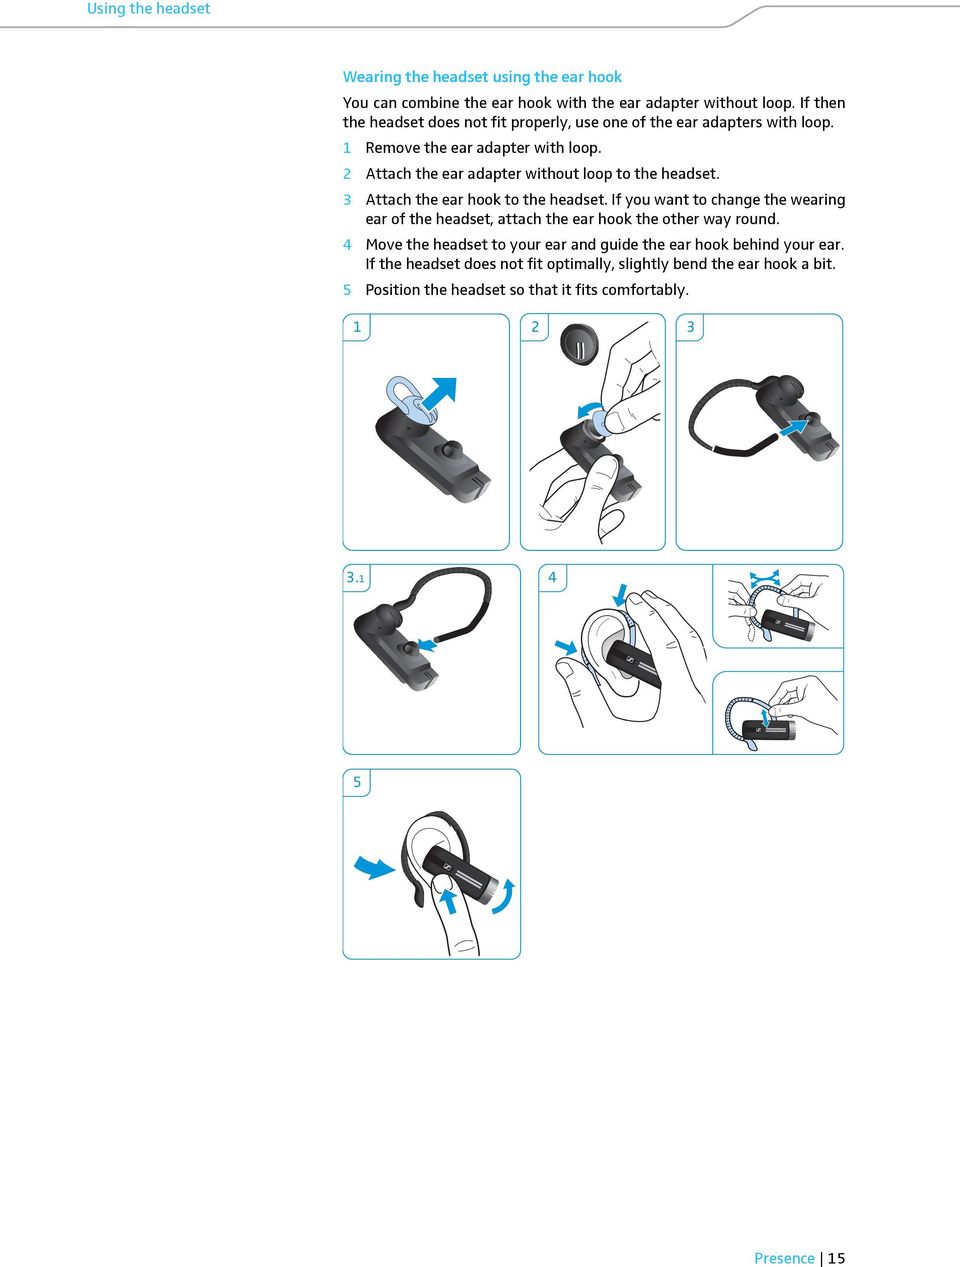 2 Attach the ear adapter without loop to the headset. 3 Attach the ear hook to the headset.